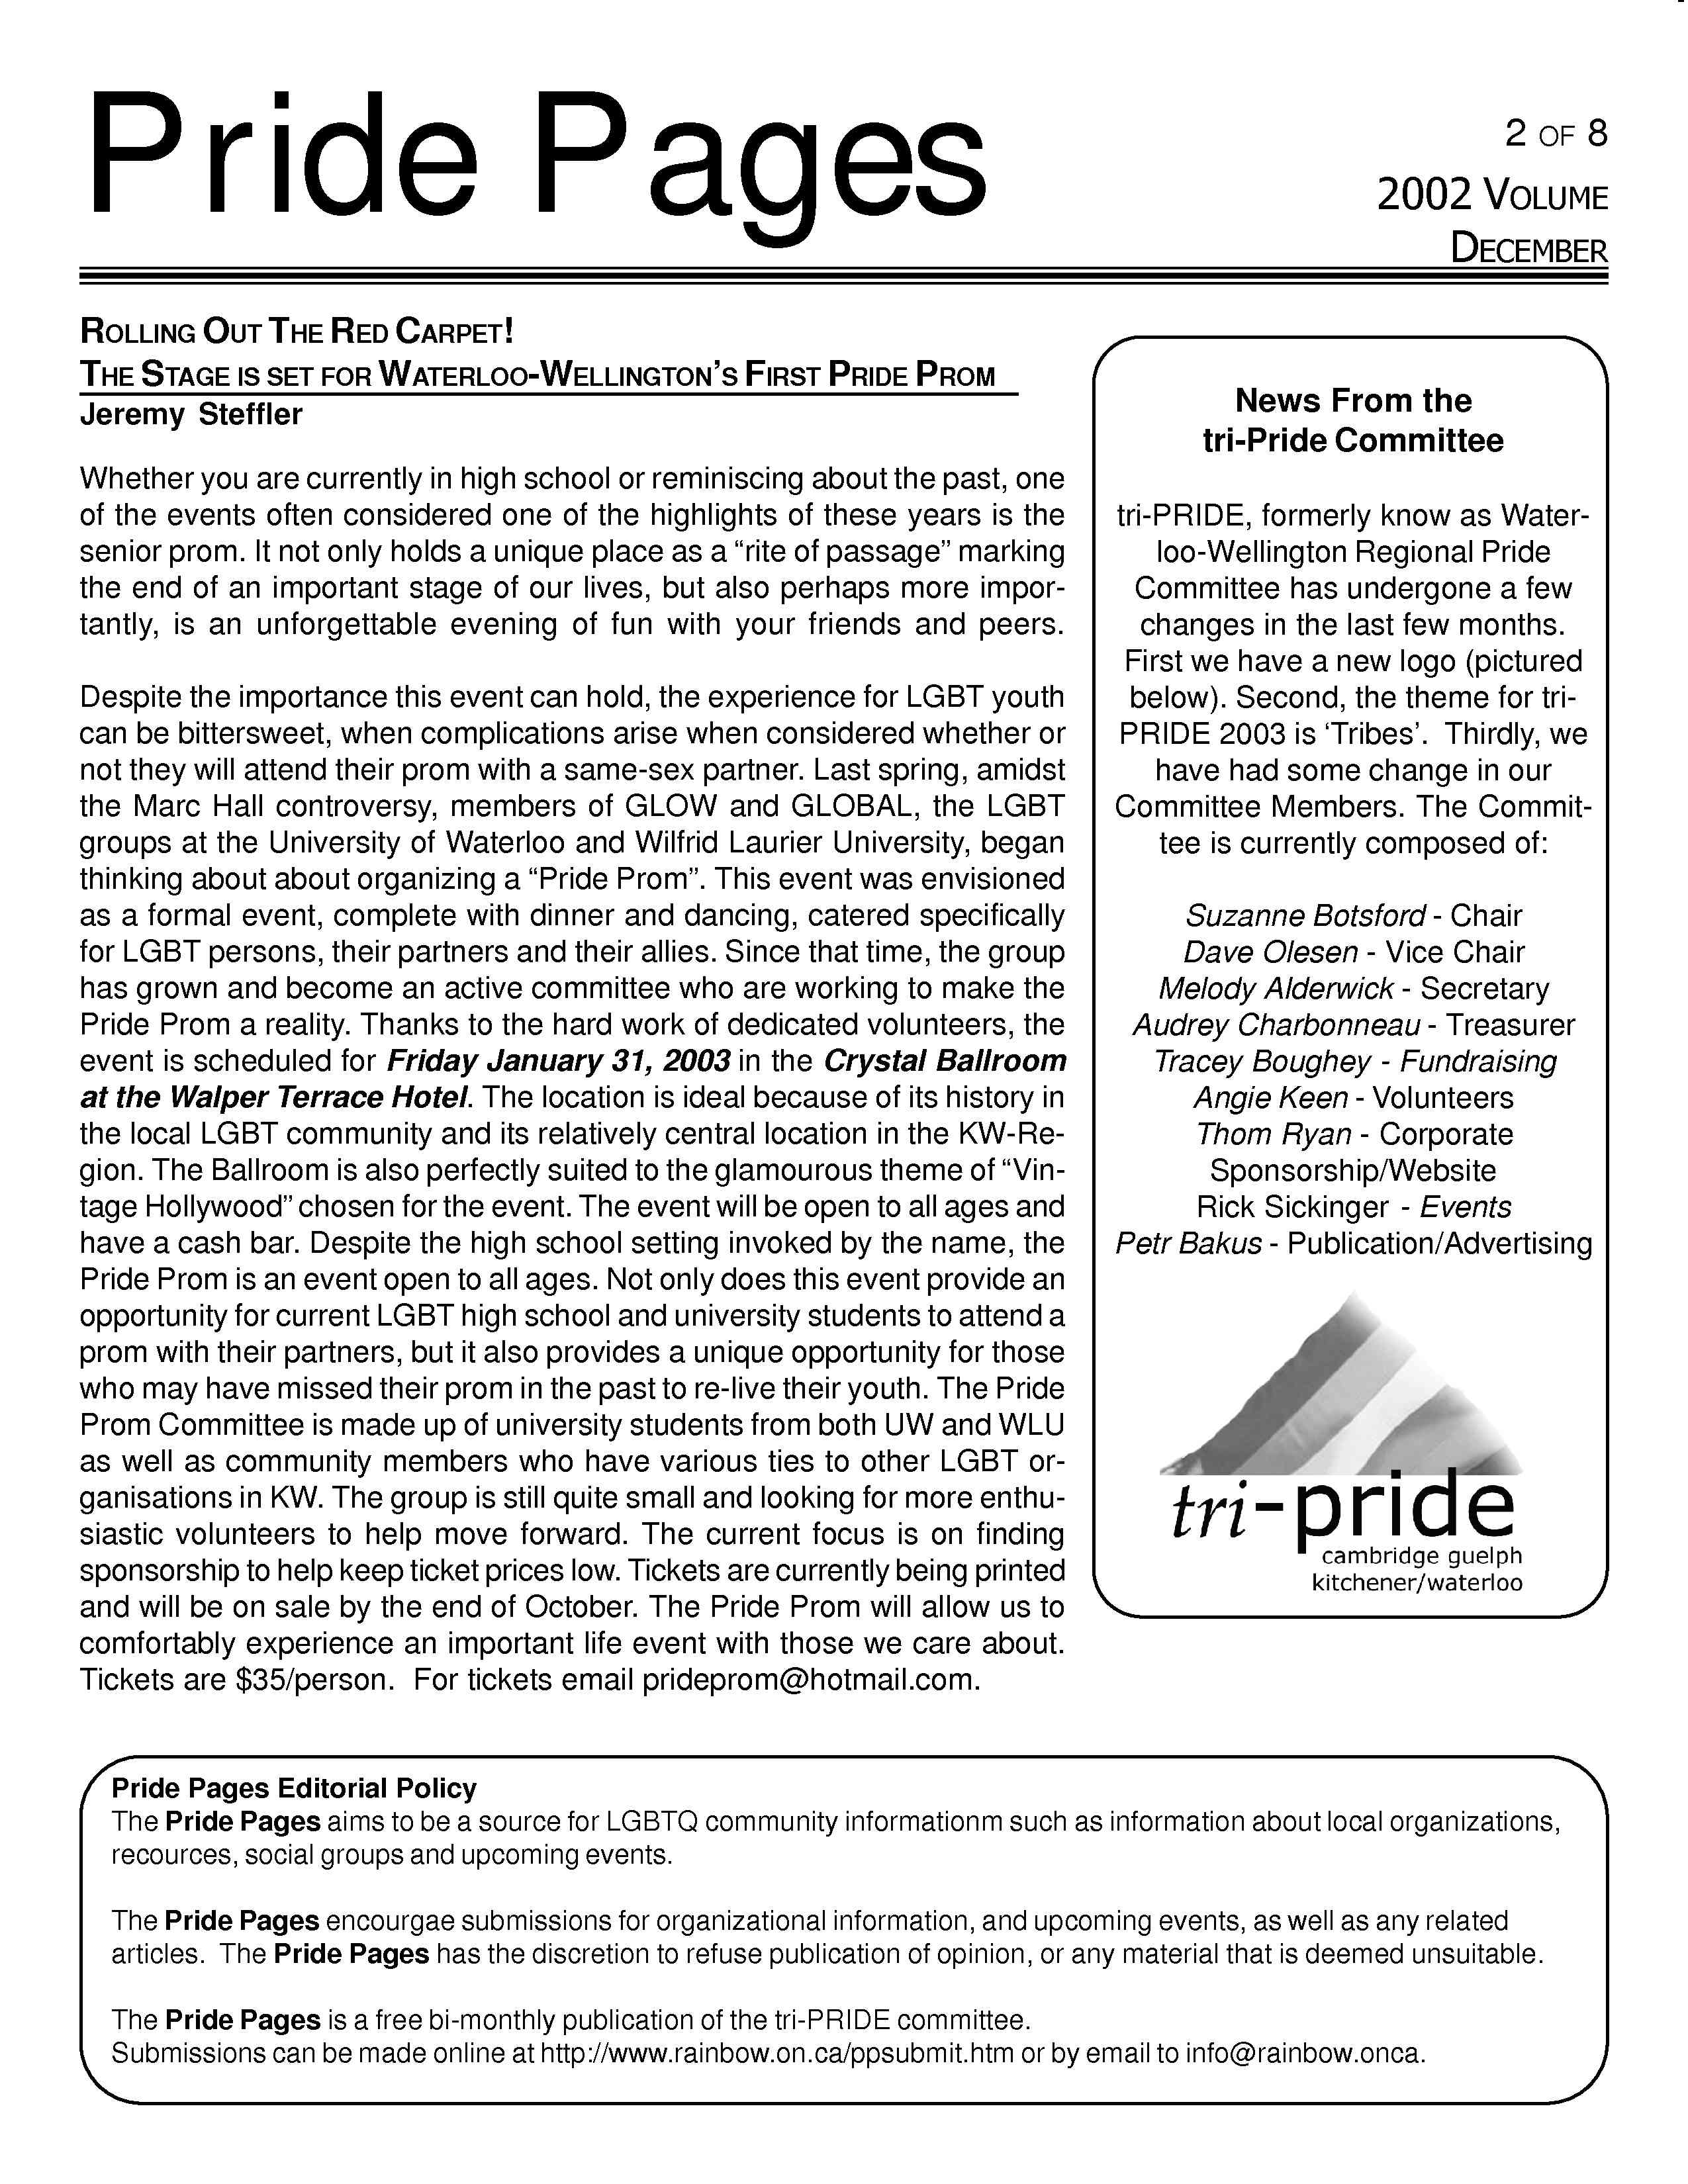 Pride Pages 2002-12 p2